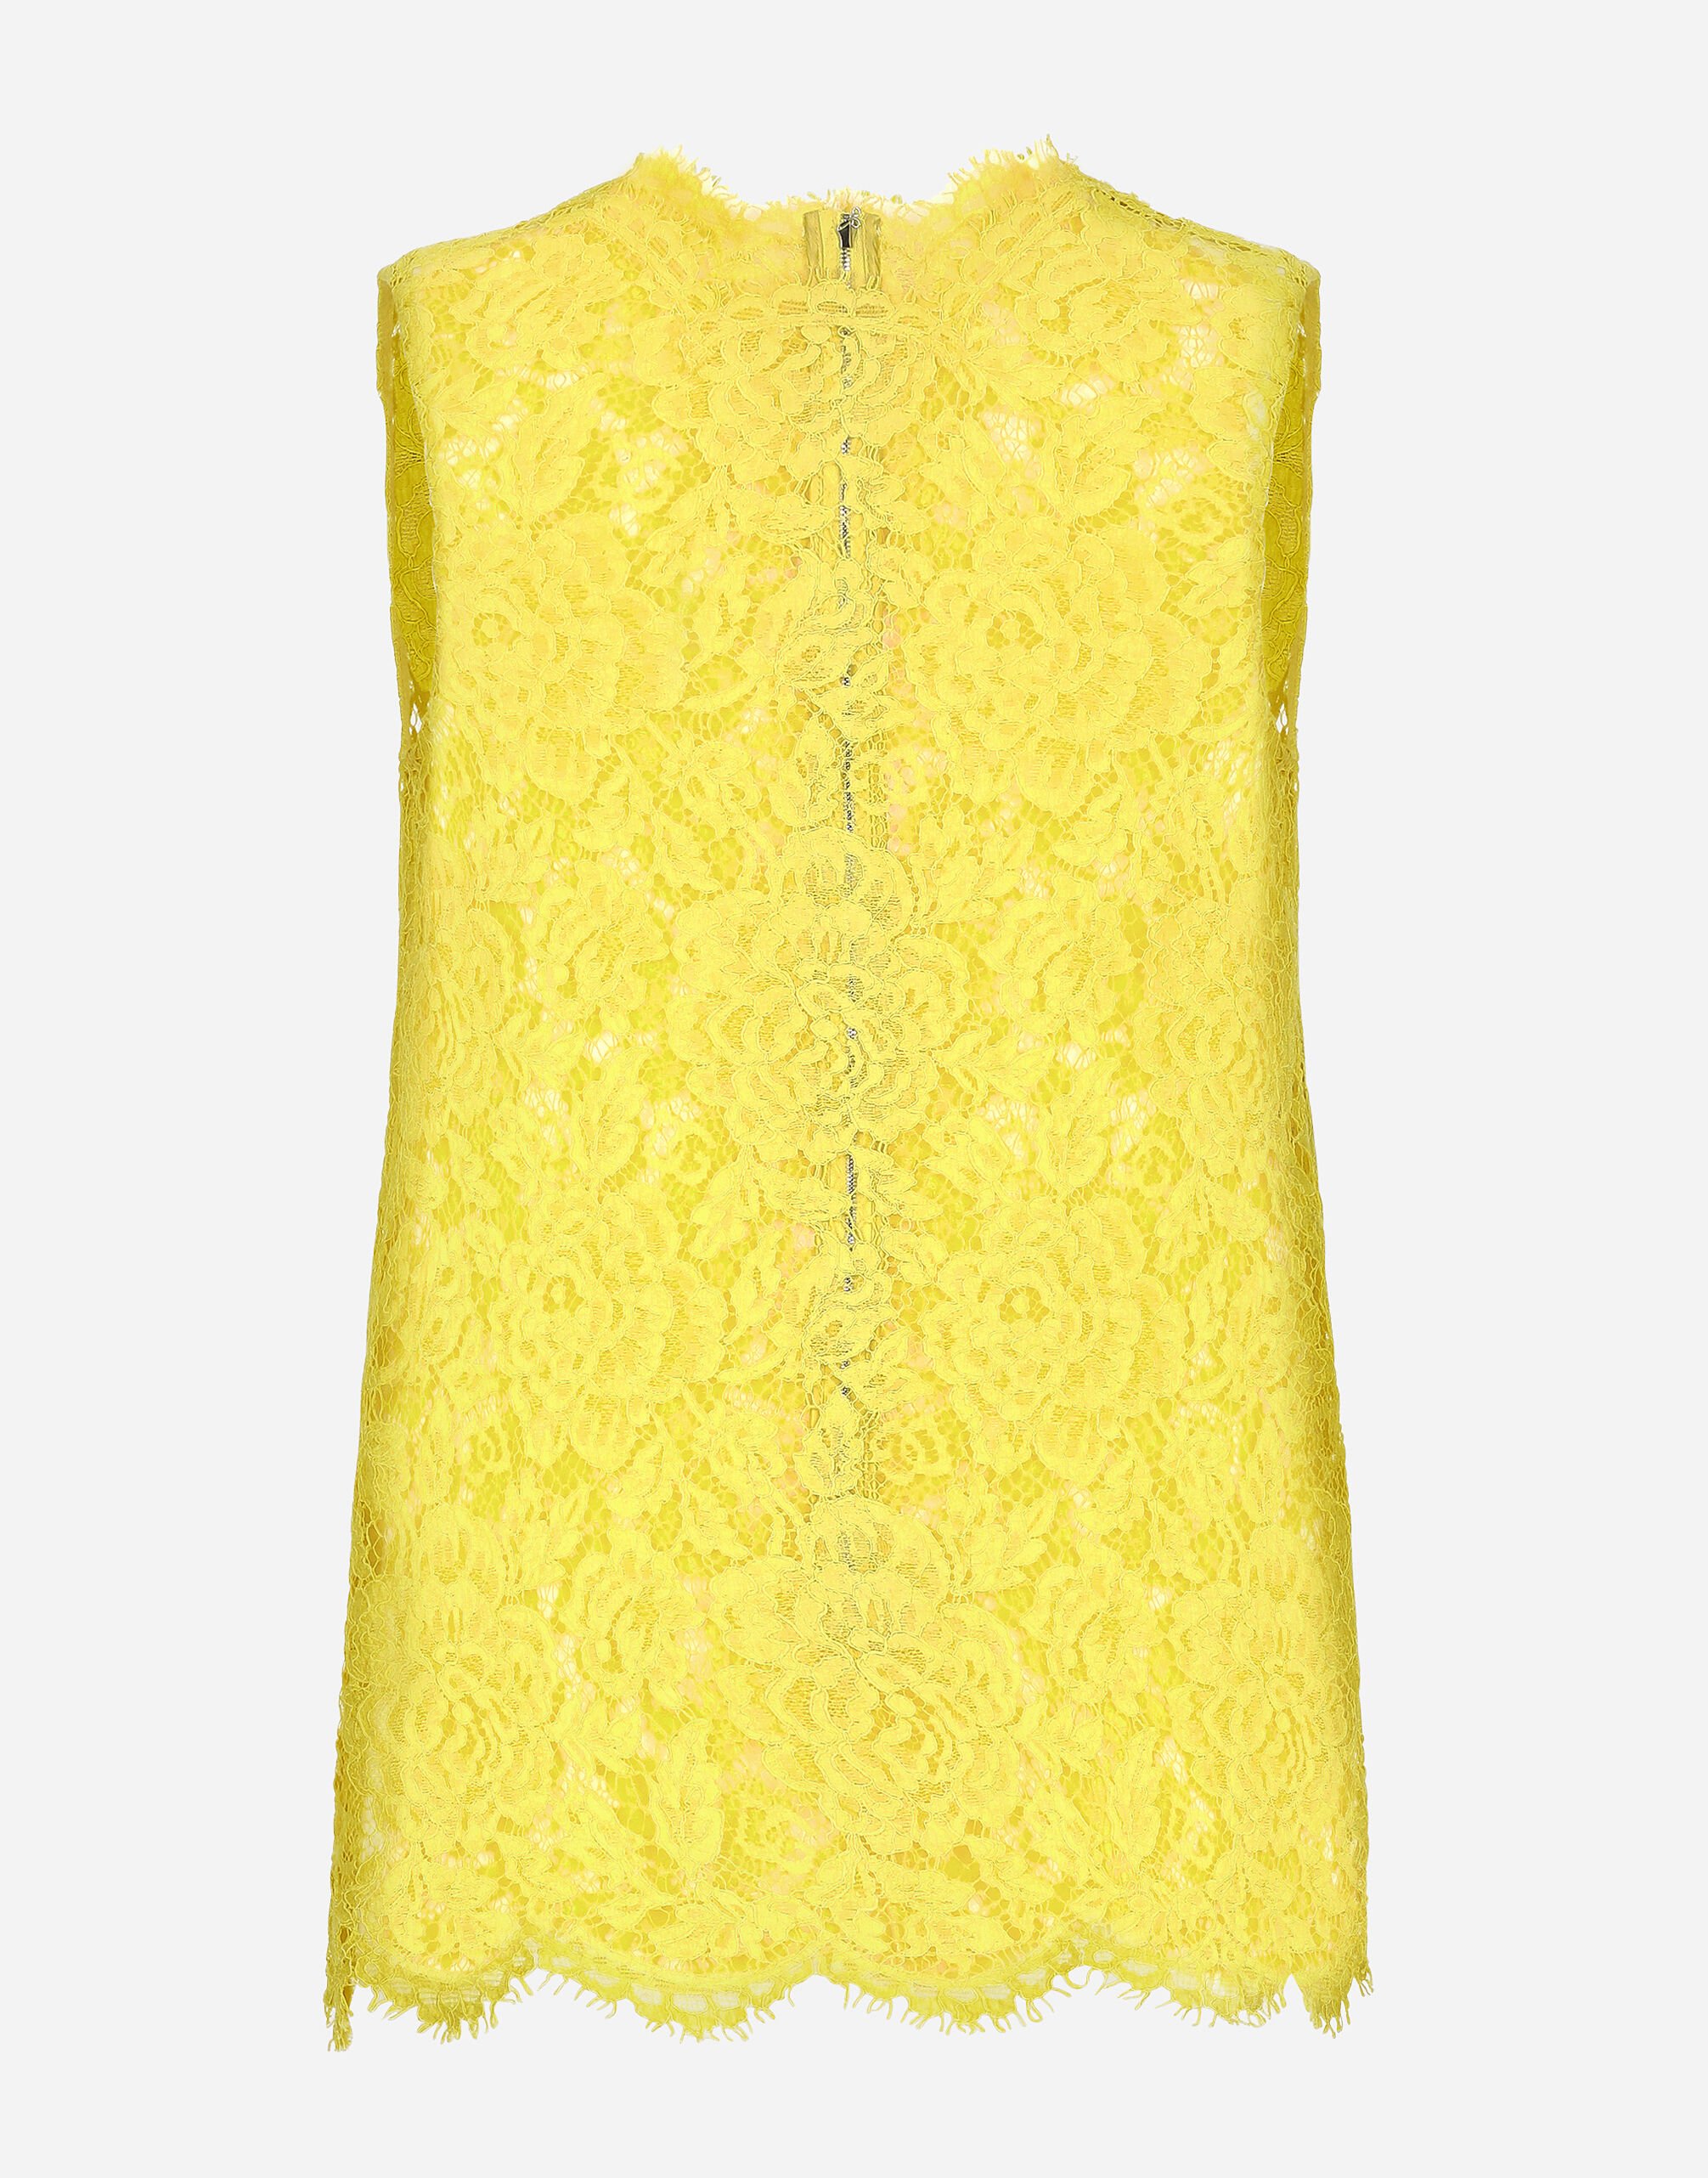 Dolce & Gabbana Branded floral cordonetto lace top Yellow F5R54TFU1NG